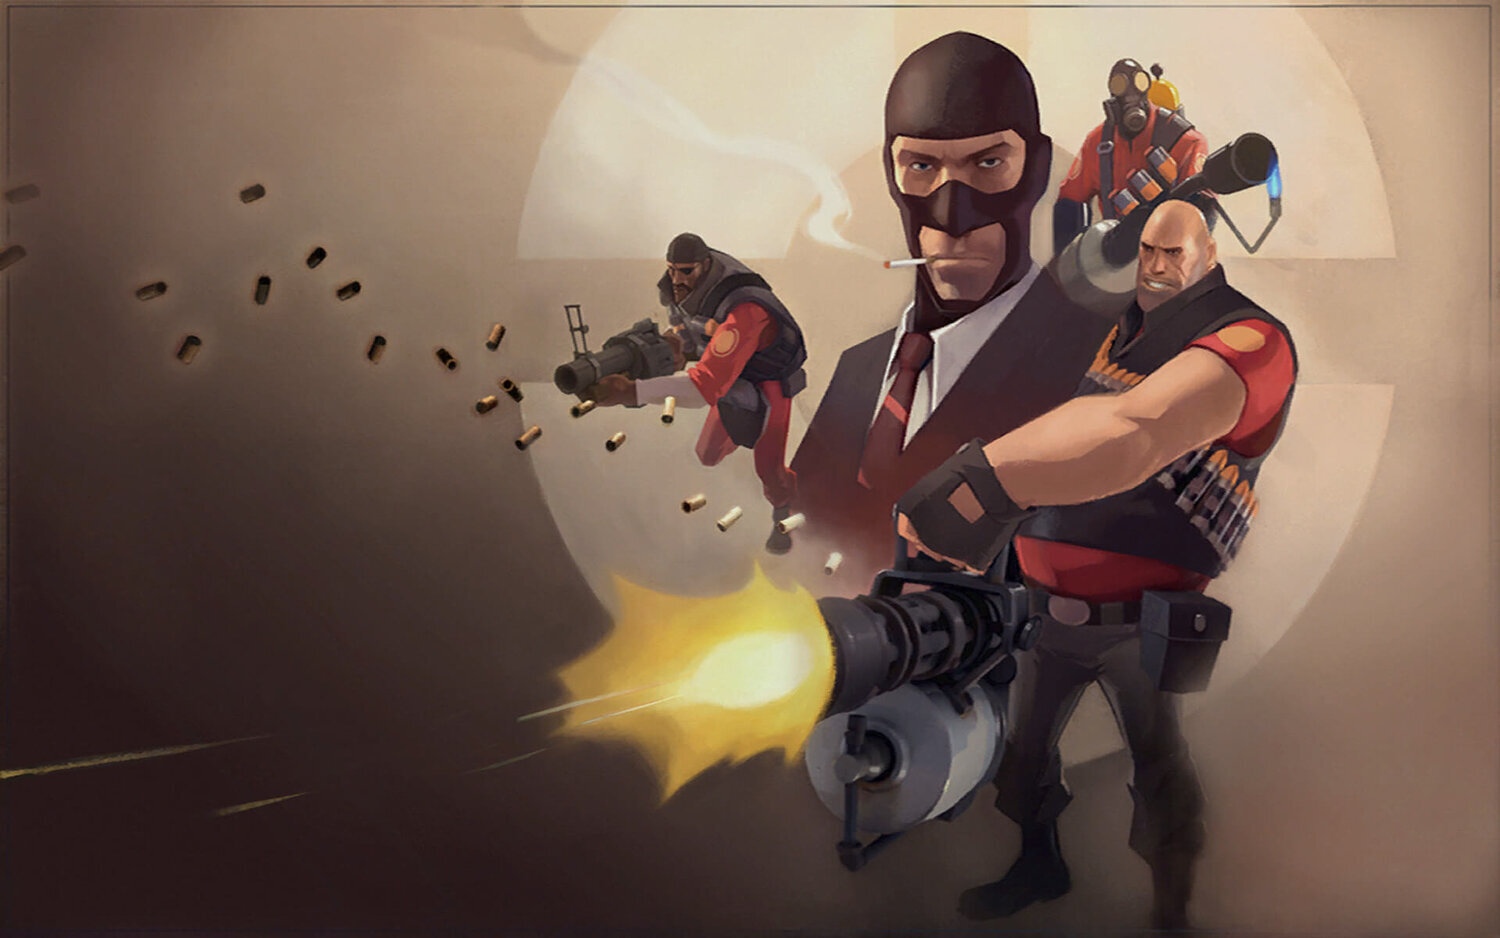 The ABSOLUTE Best Scout Cosmetics in TF2 >> Full List!